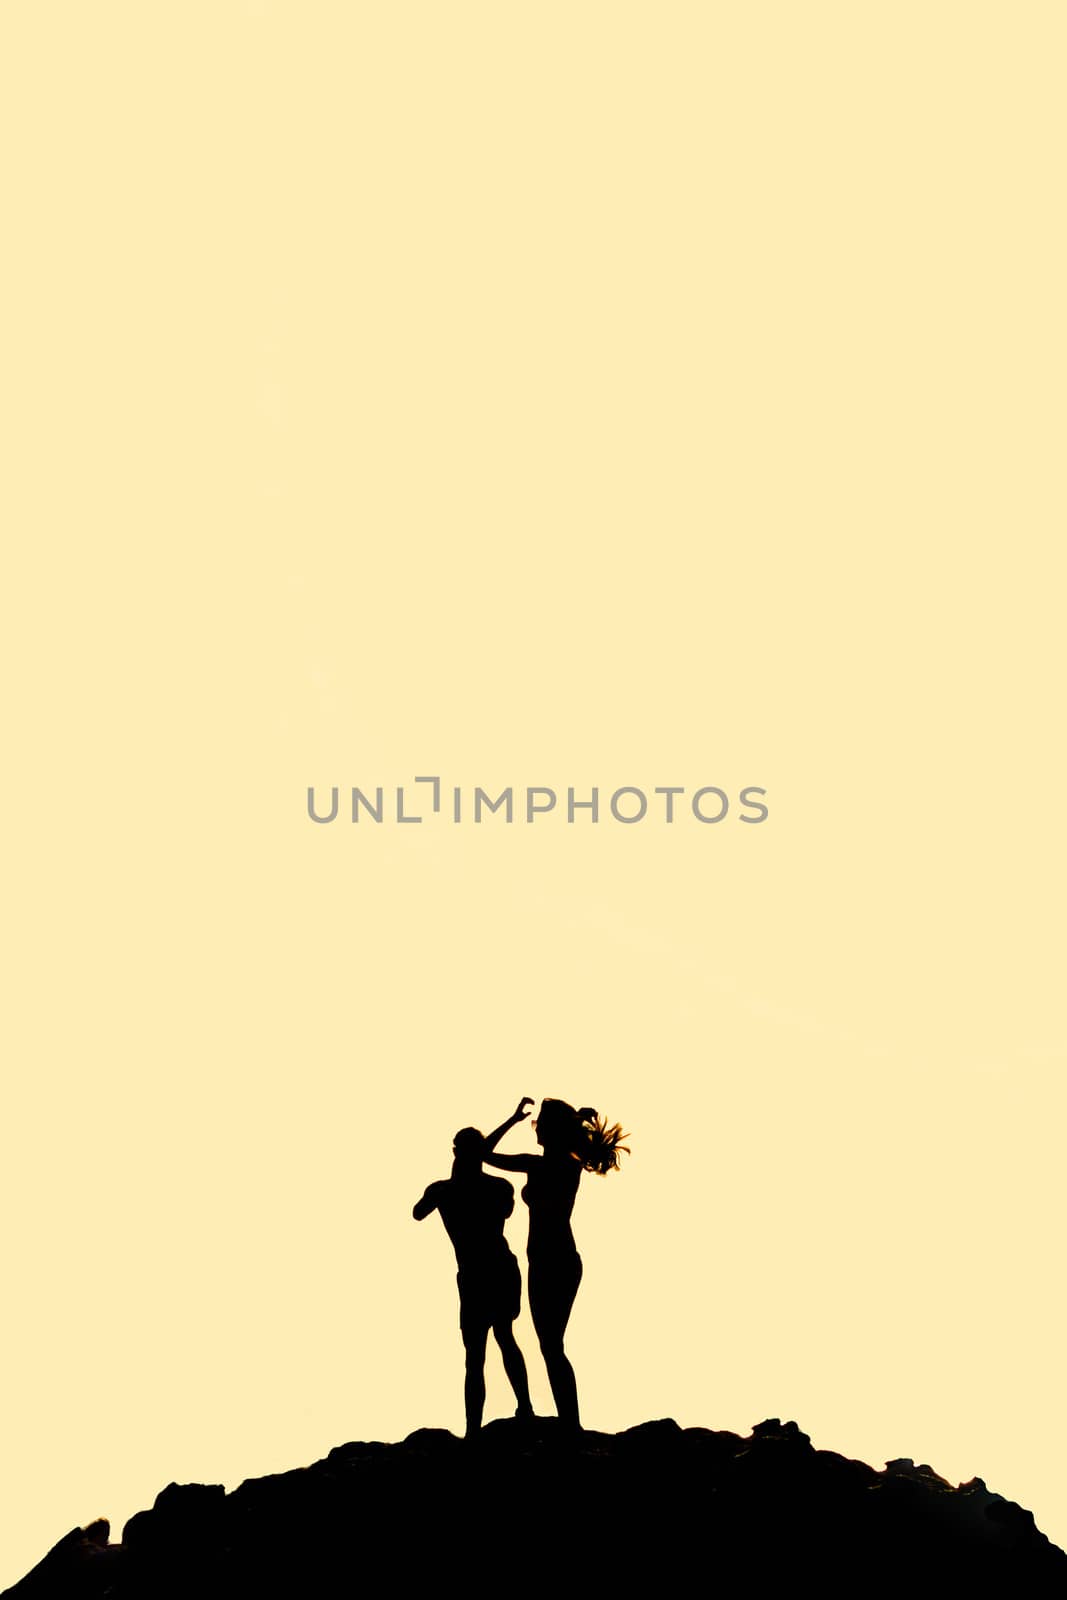 Man and woman standing on mountain silhouette by xbrchx